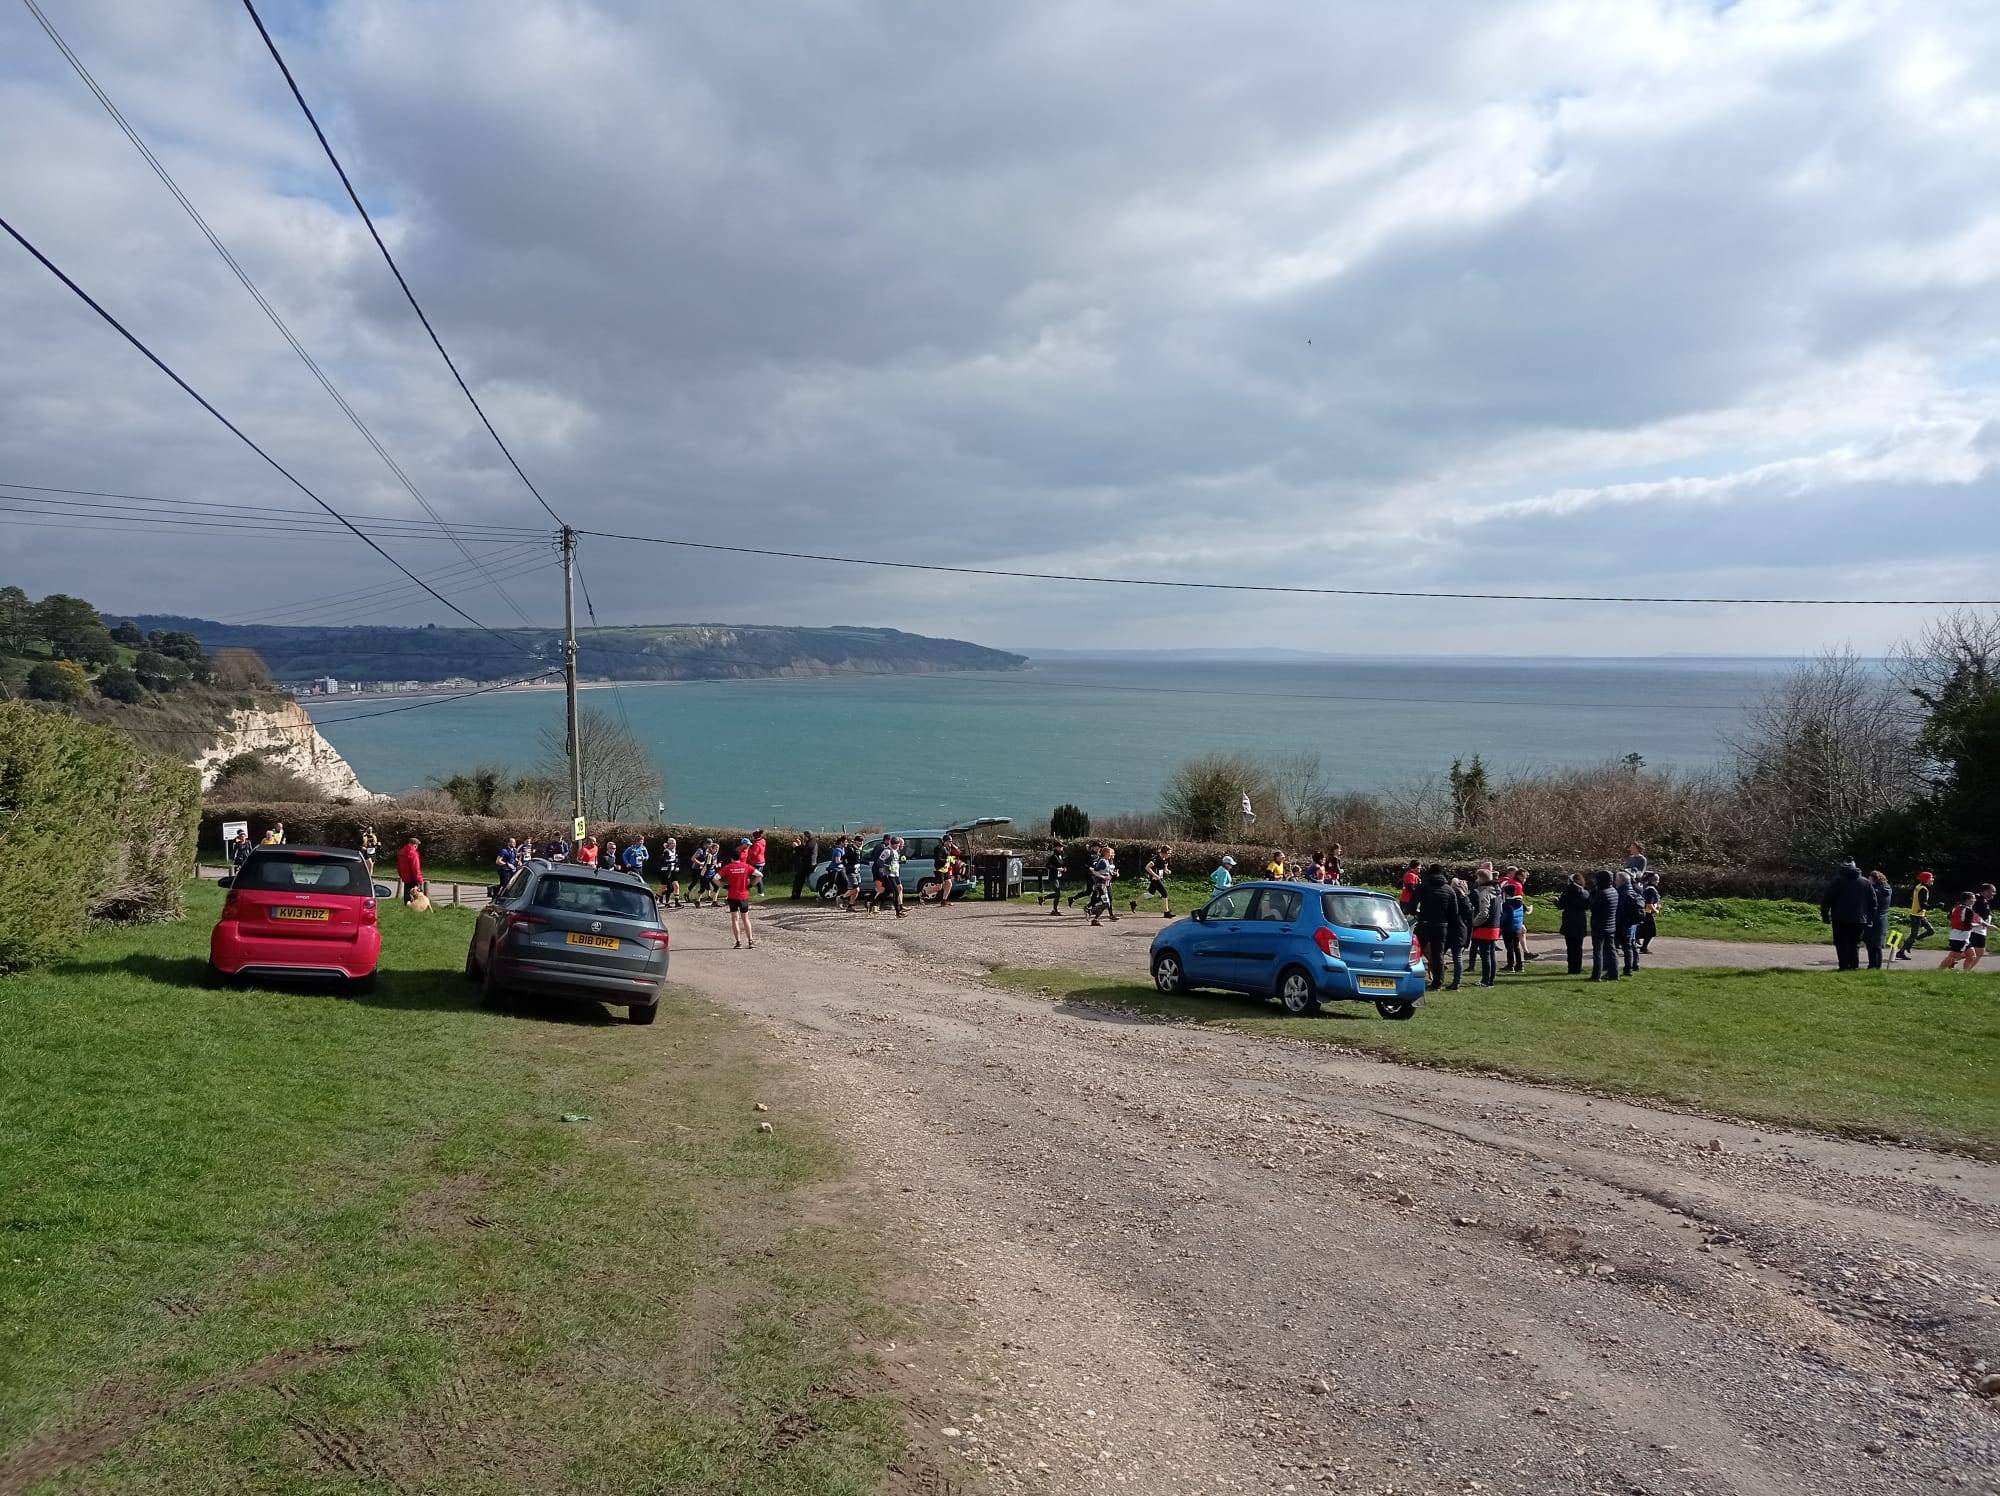 Looking back at Beer. Now us - and the runners - make our way on to Branscombe…